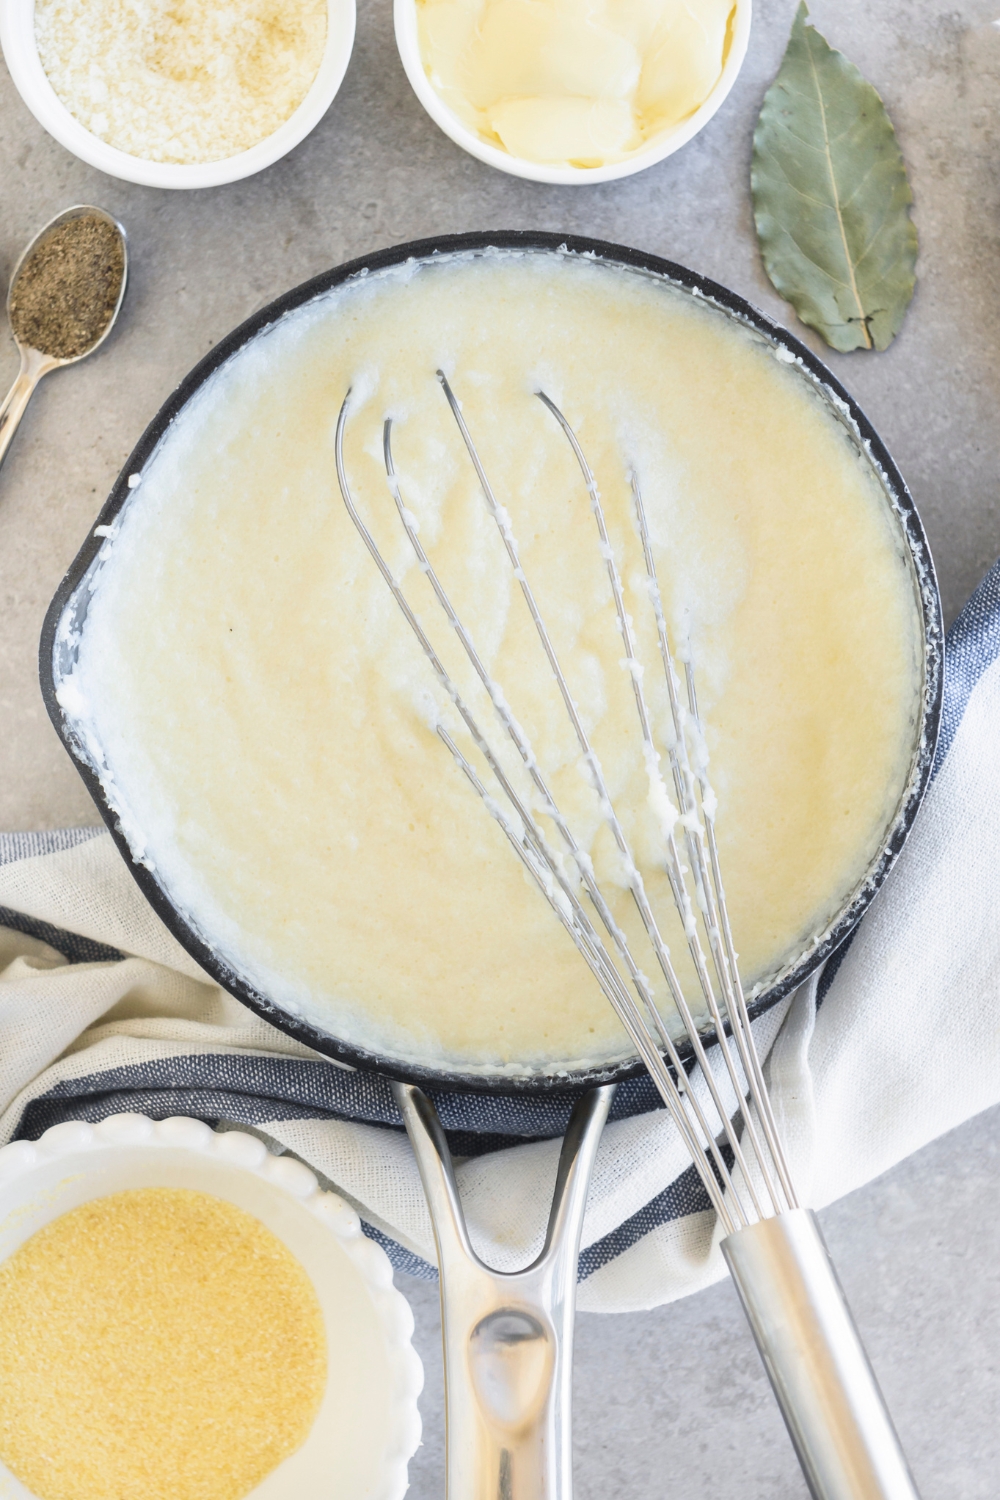 A whisk rests in a saucepan full of grits. Cheese, butter, and seasonings are nearby.